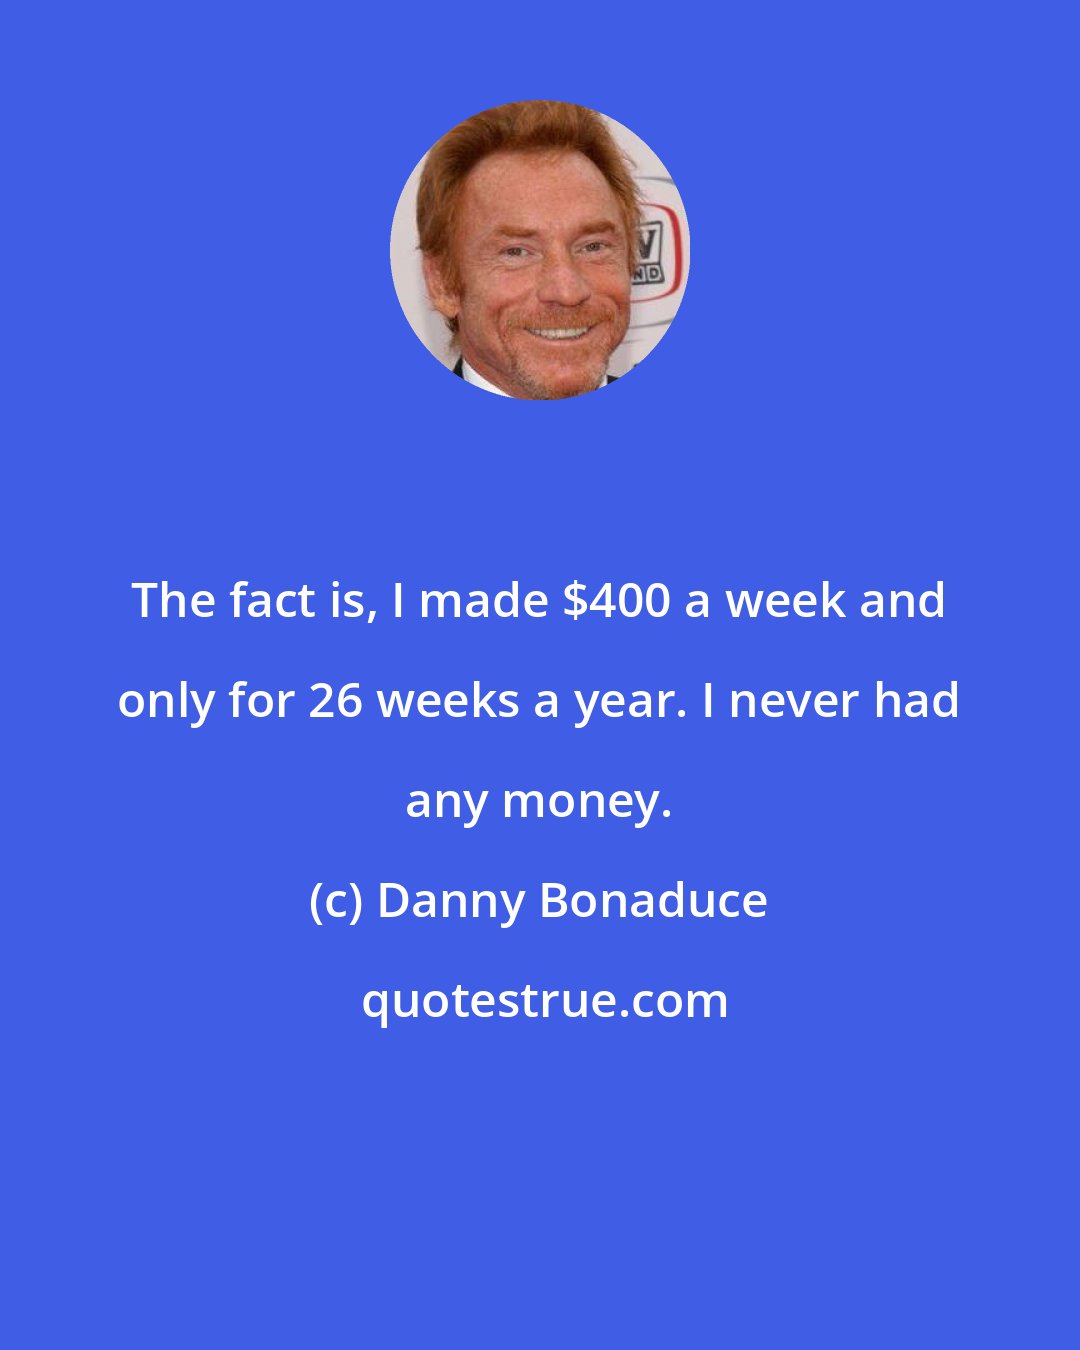 Danny Bonaduce: The fact is, I made $400 a week and only for 26 weeks a year. I never had any money.